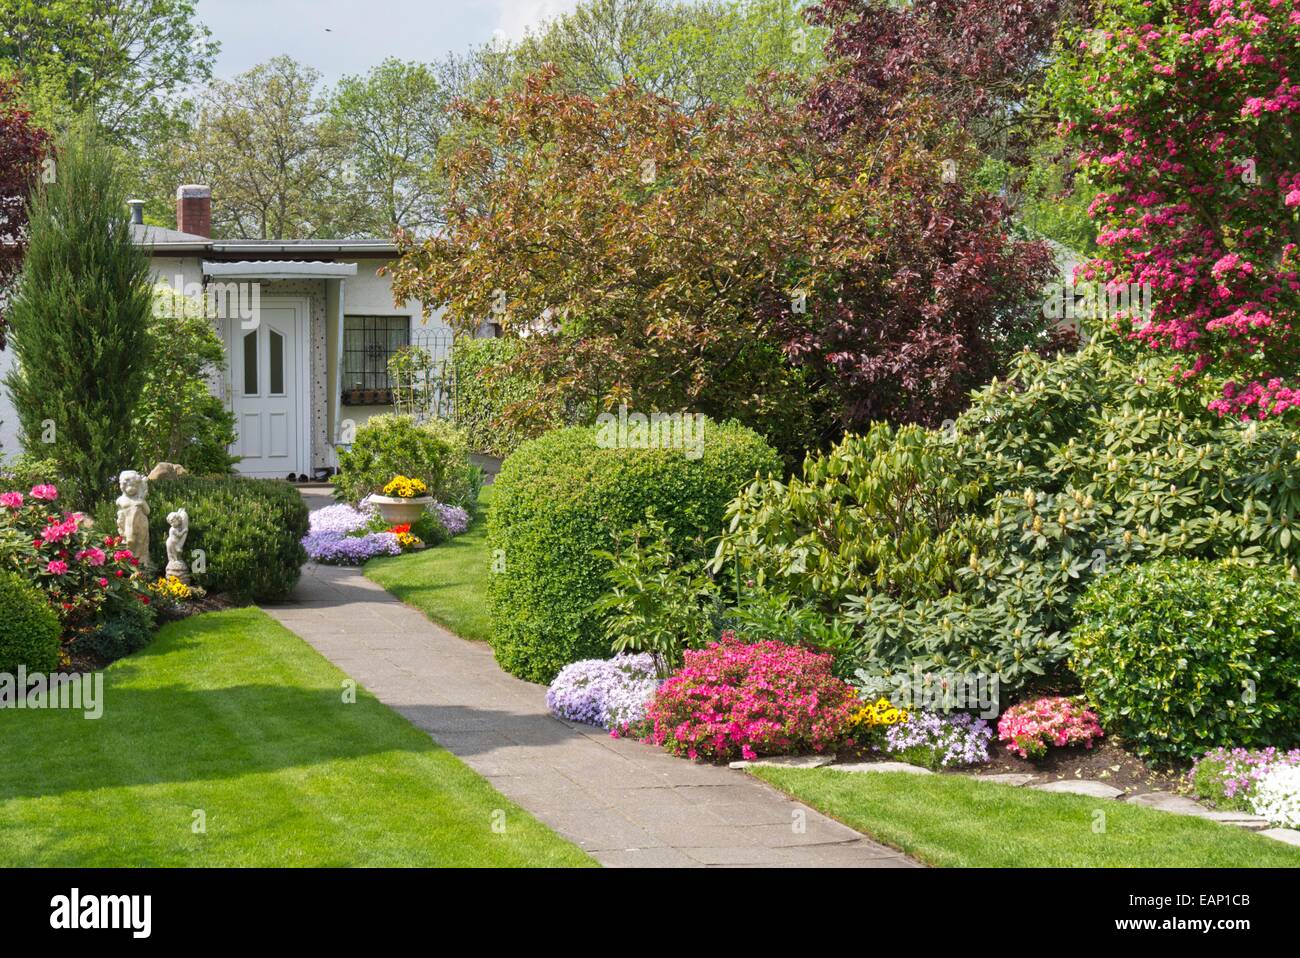 Front garden with rhododendrons (Rhododendron) Stock Photo